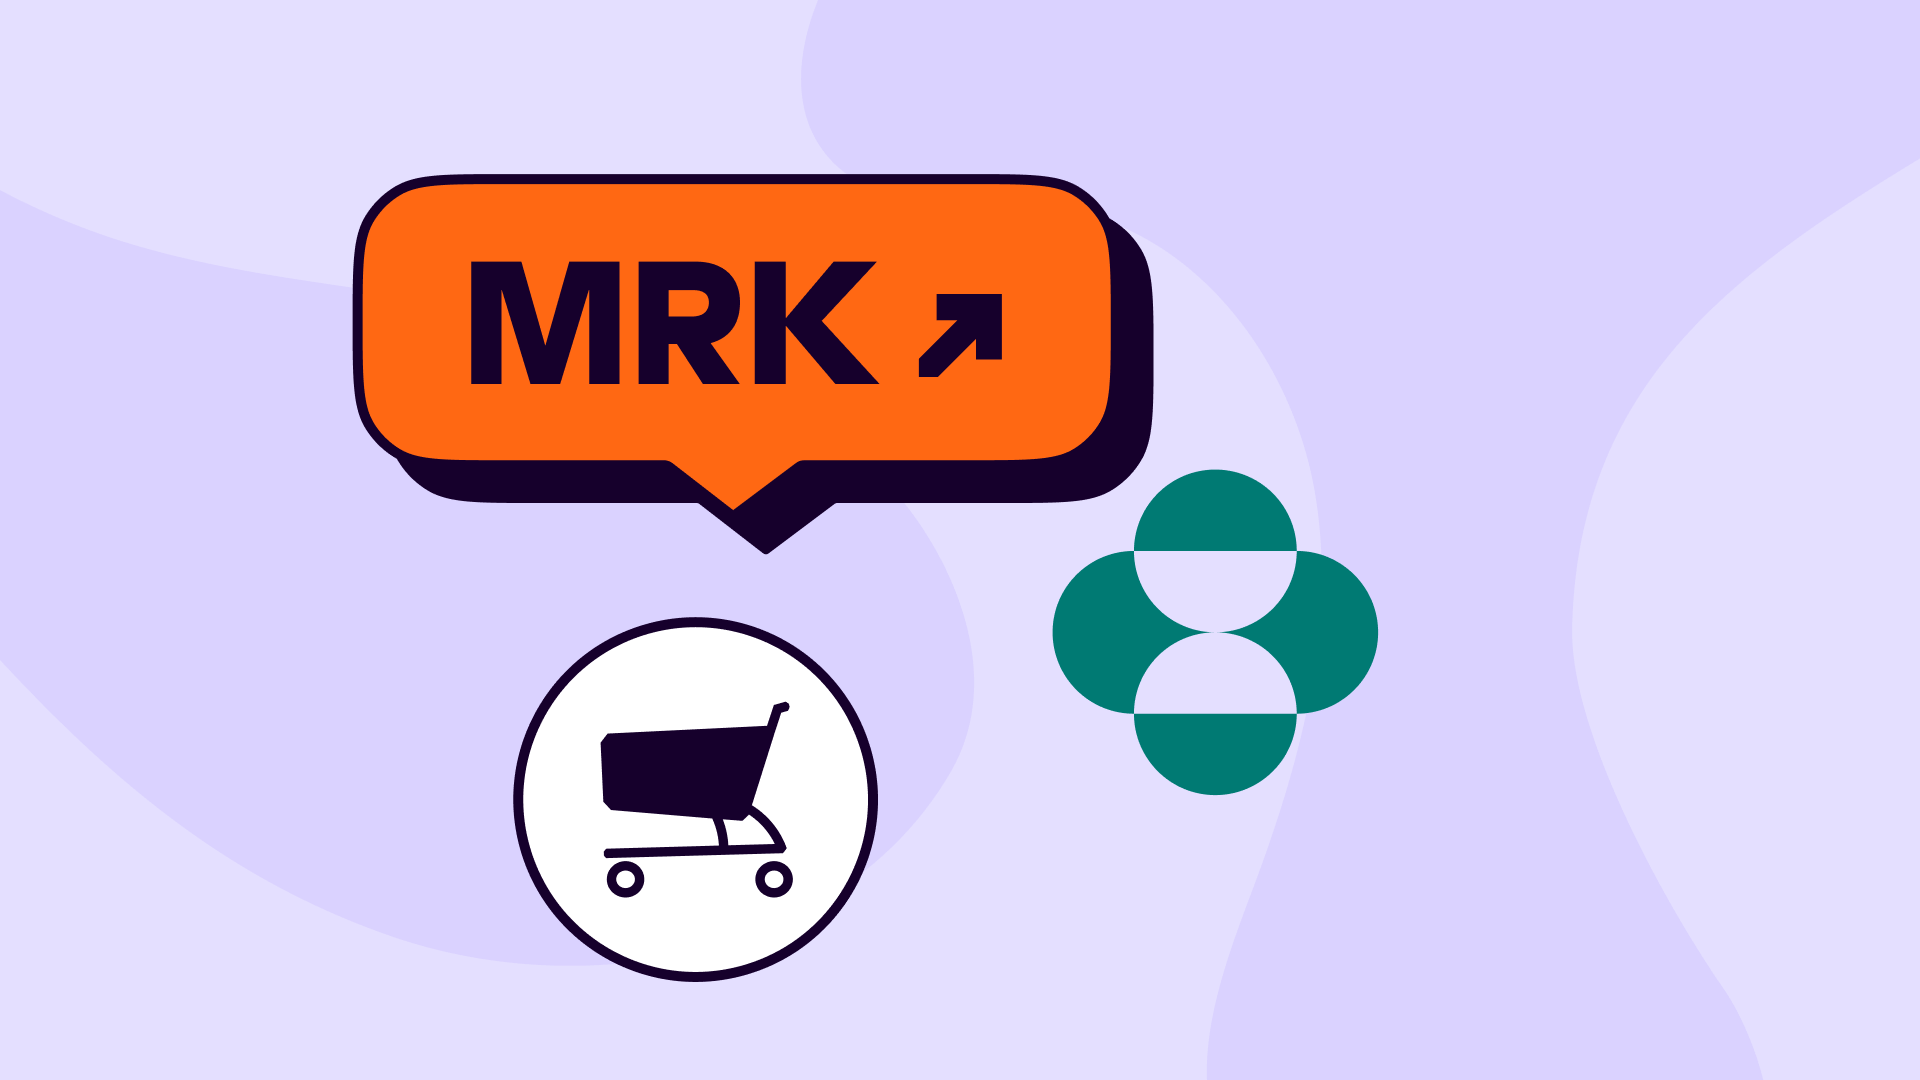 How to buy and sell shares in Merck